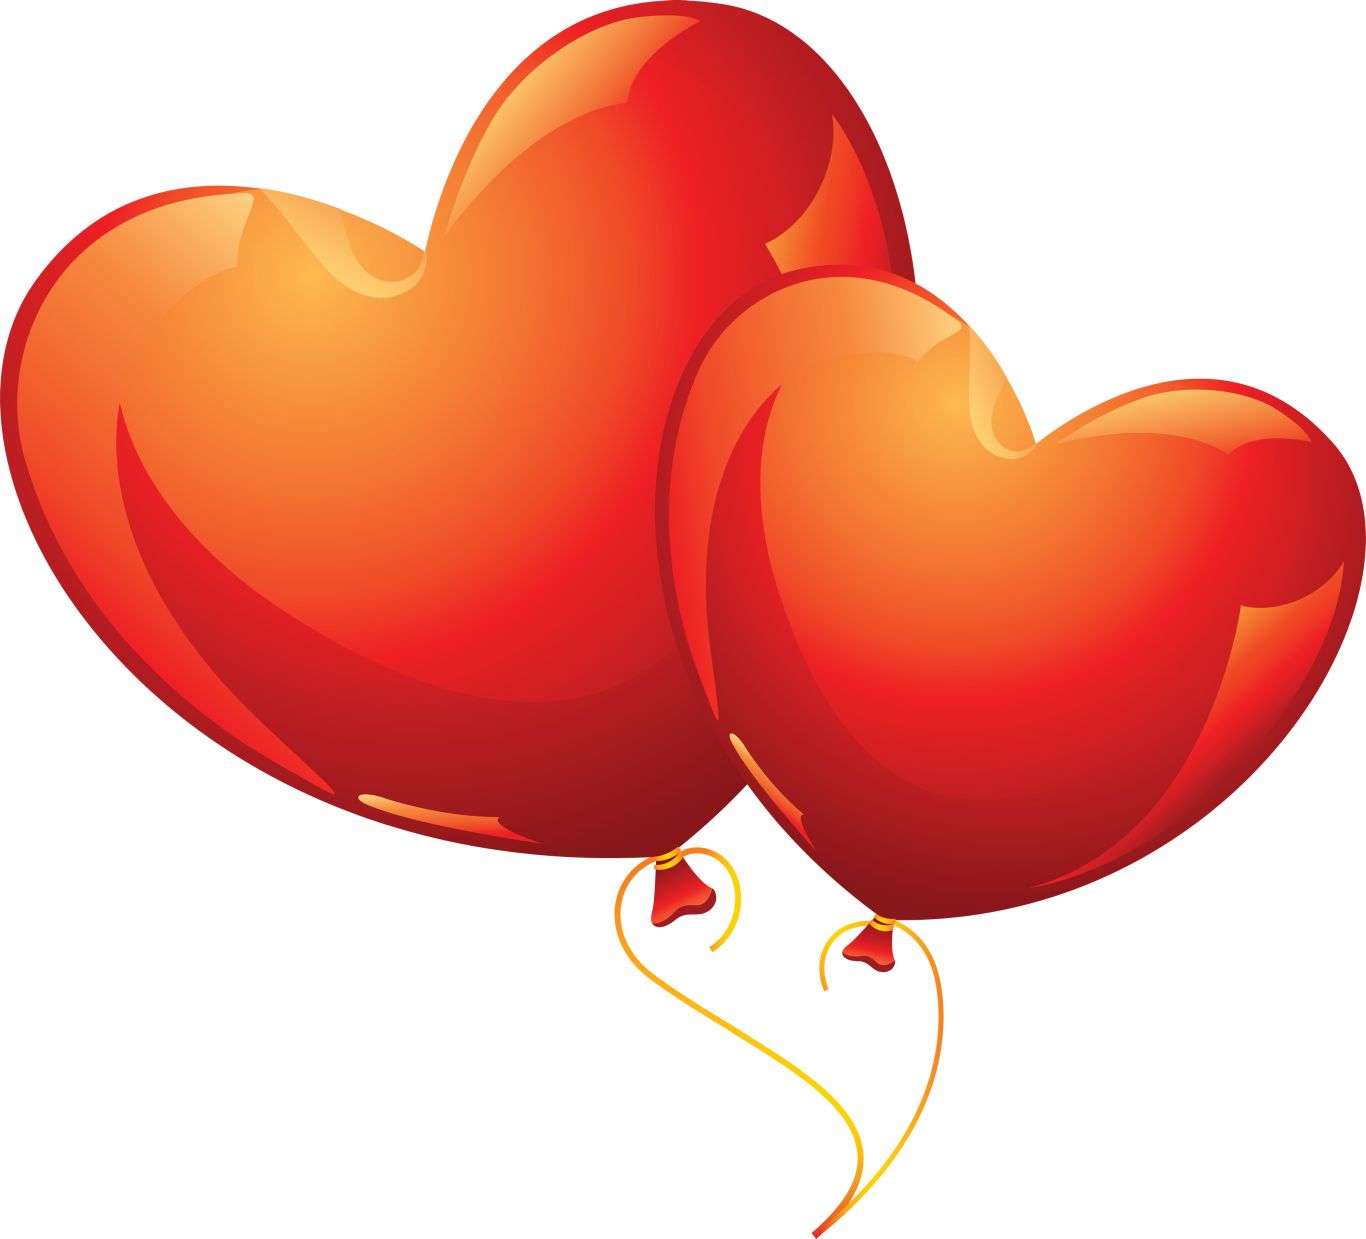 Heart balloon PNG image, free download, heart balloons    图片编号:3394